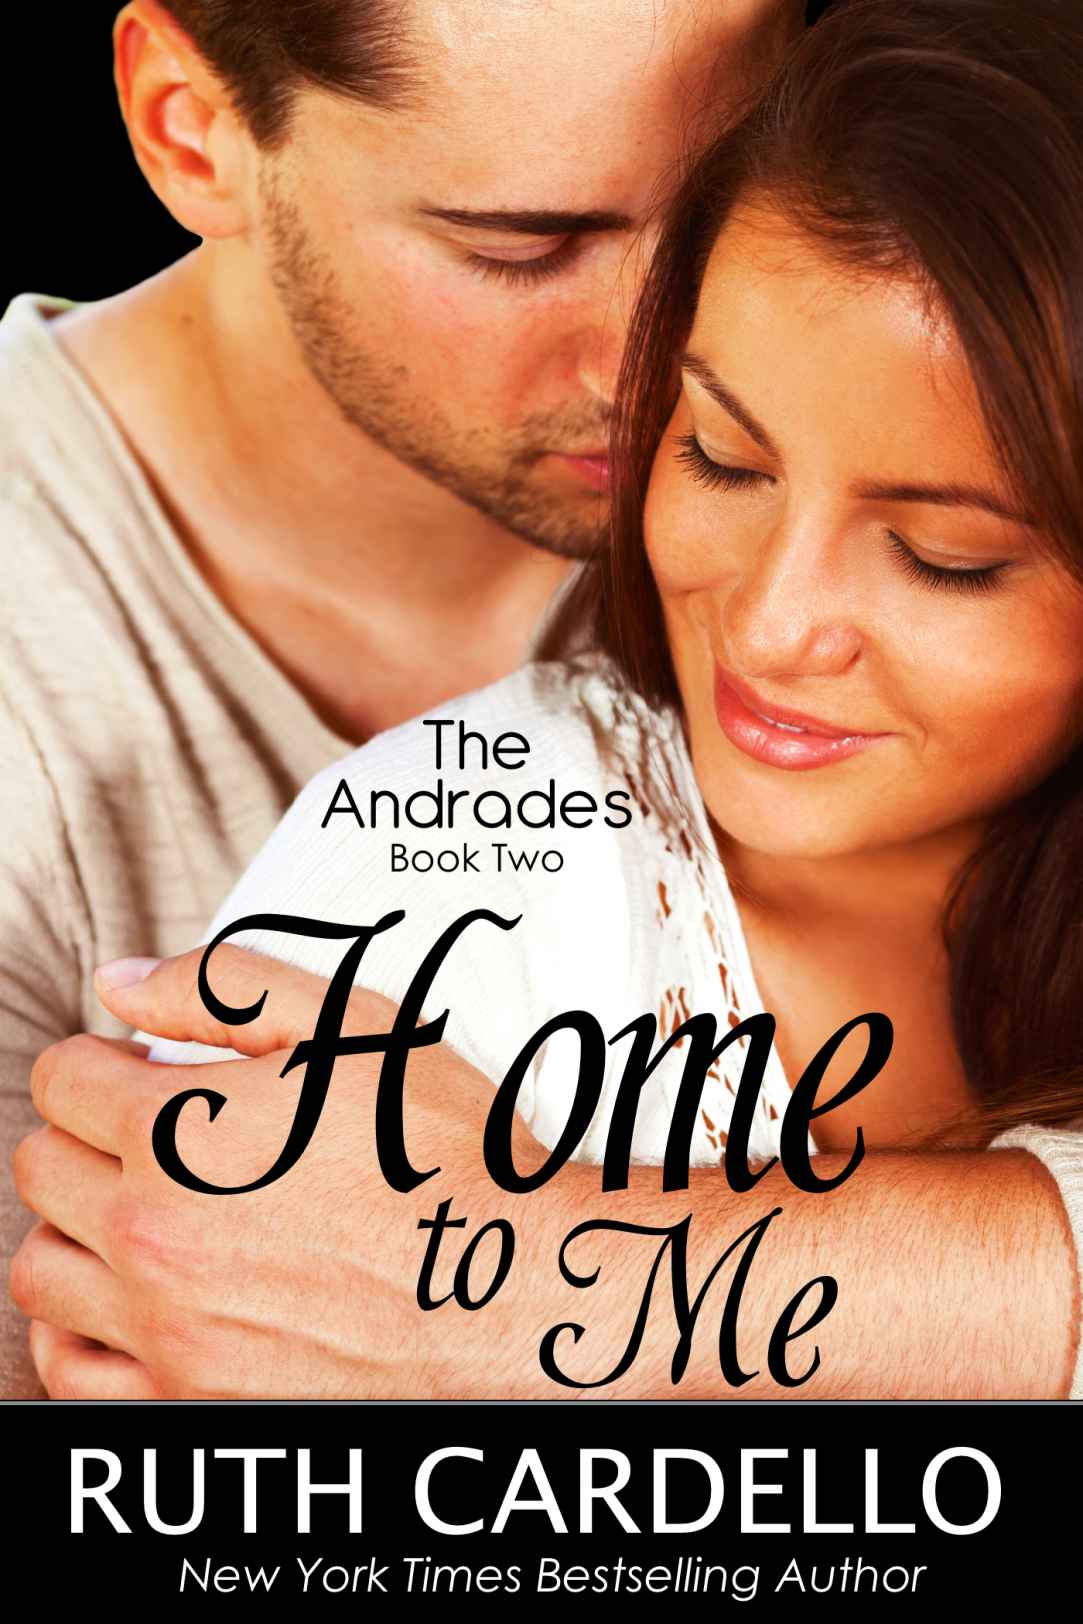 Home to Me (The Andrades, Book 2) by Ruth Cardello